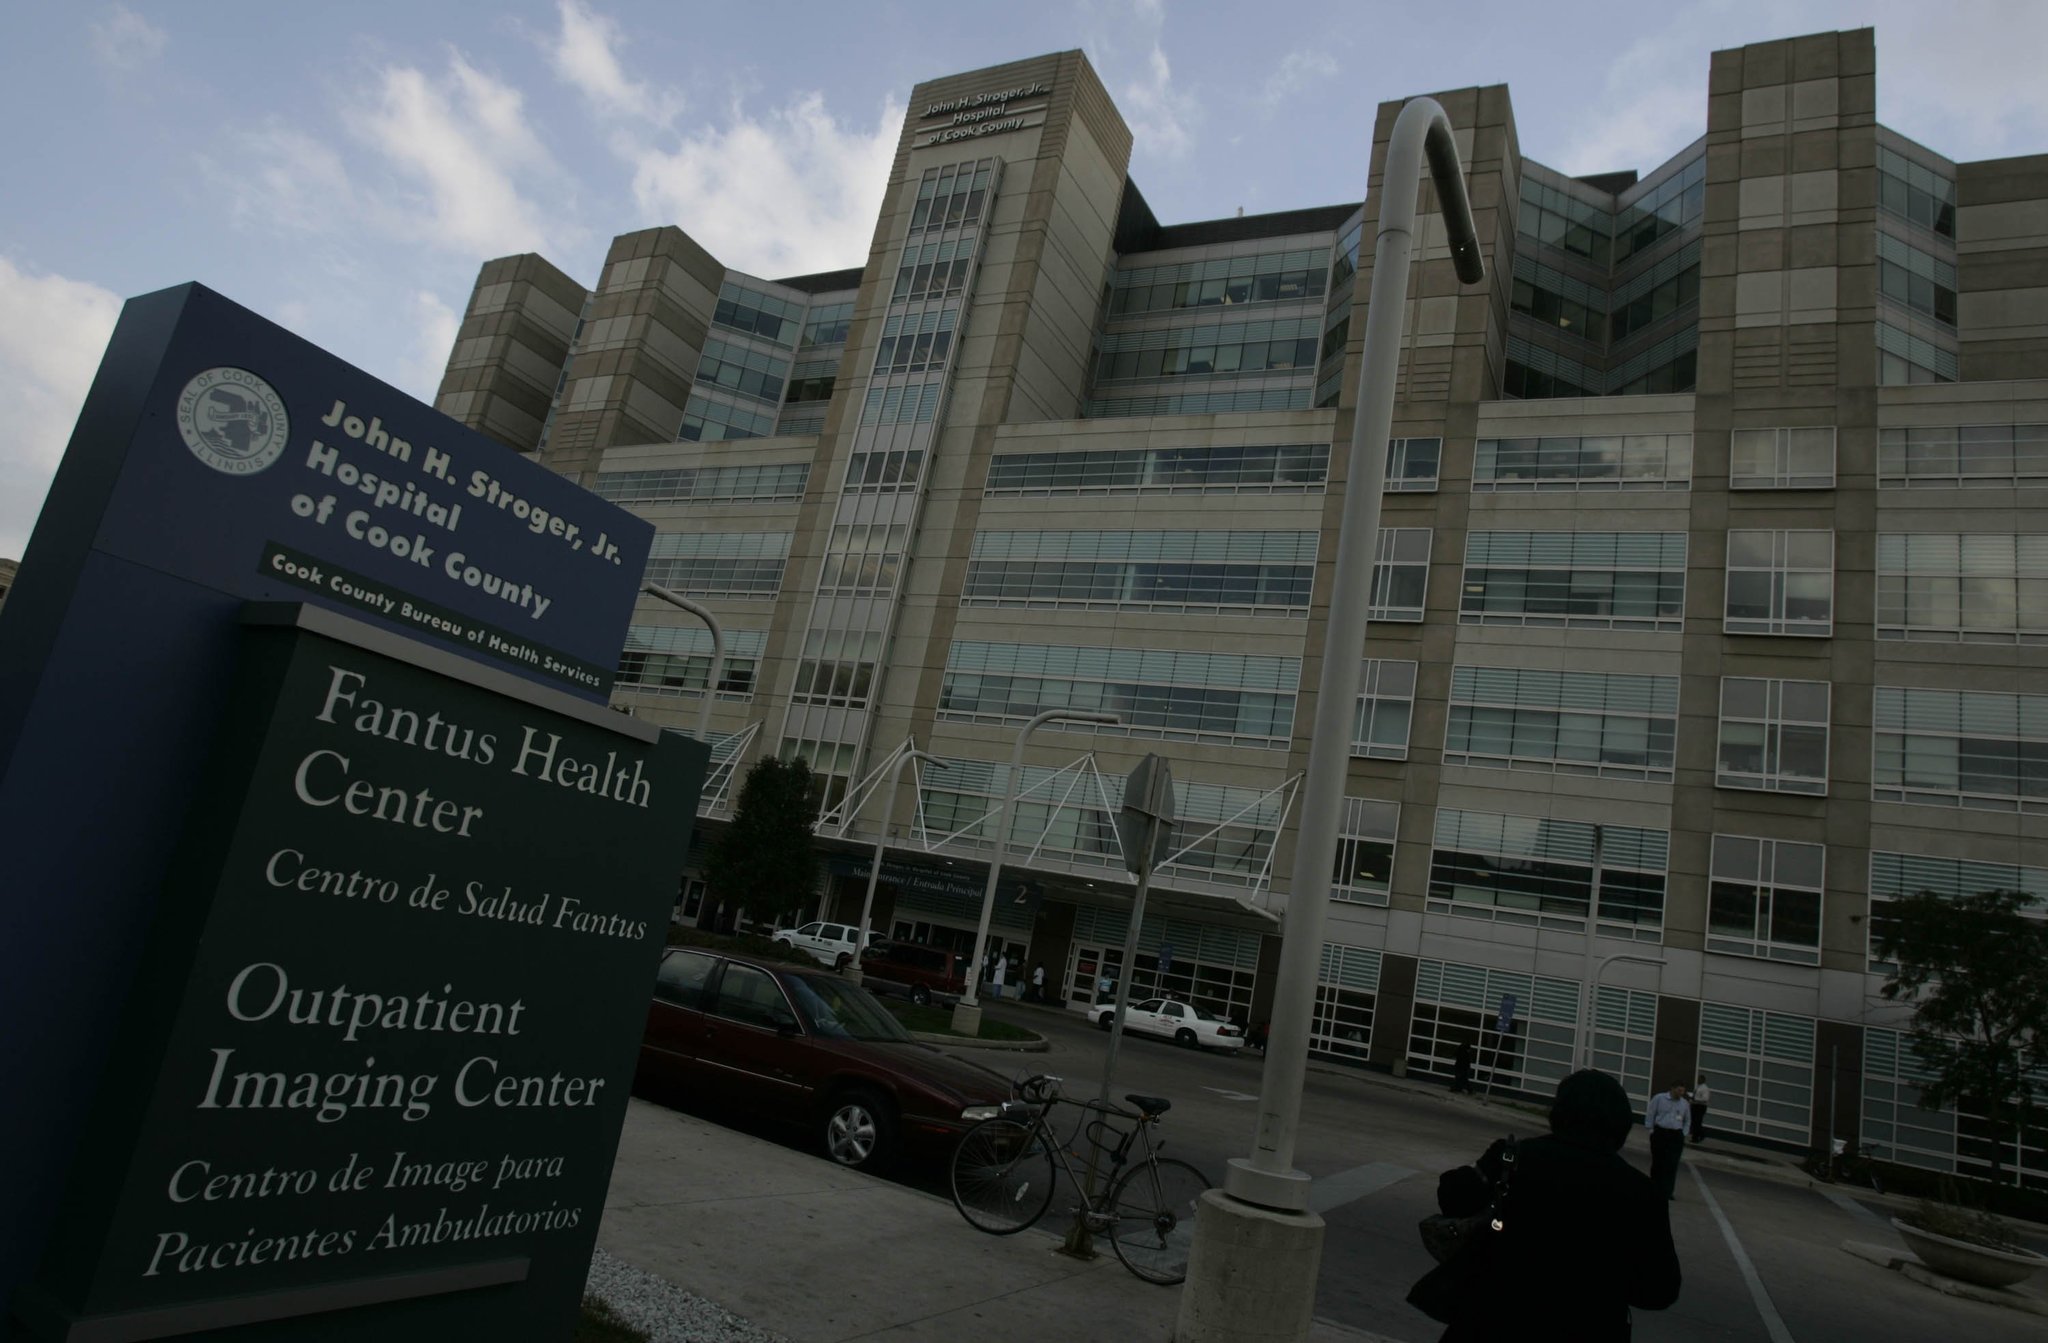 What are some services offered by John H. Stroger, Jr. Hospital of Cook County?